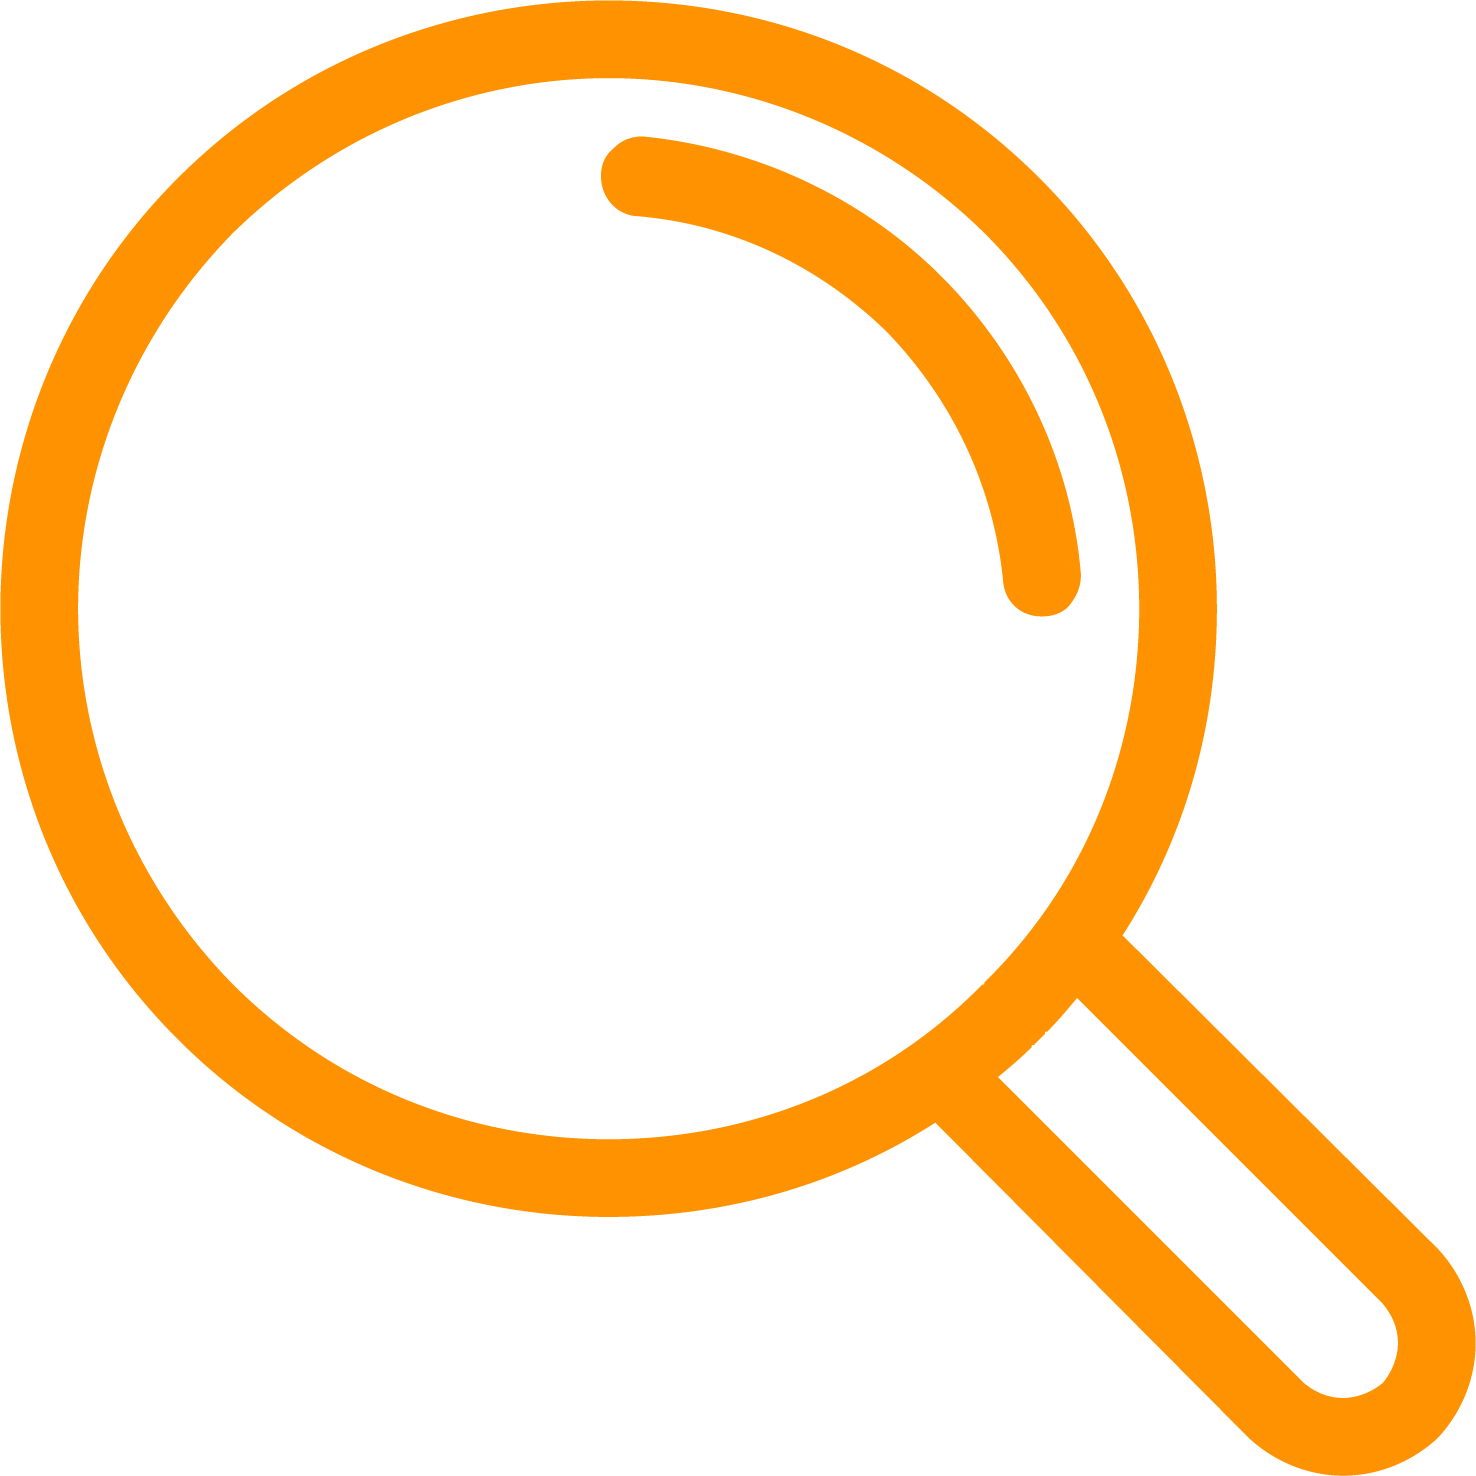 magnifying glass lineleader icon